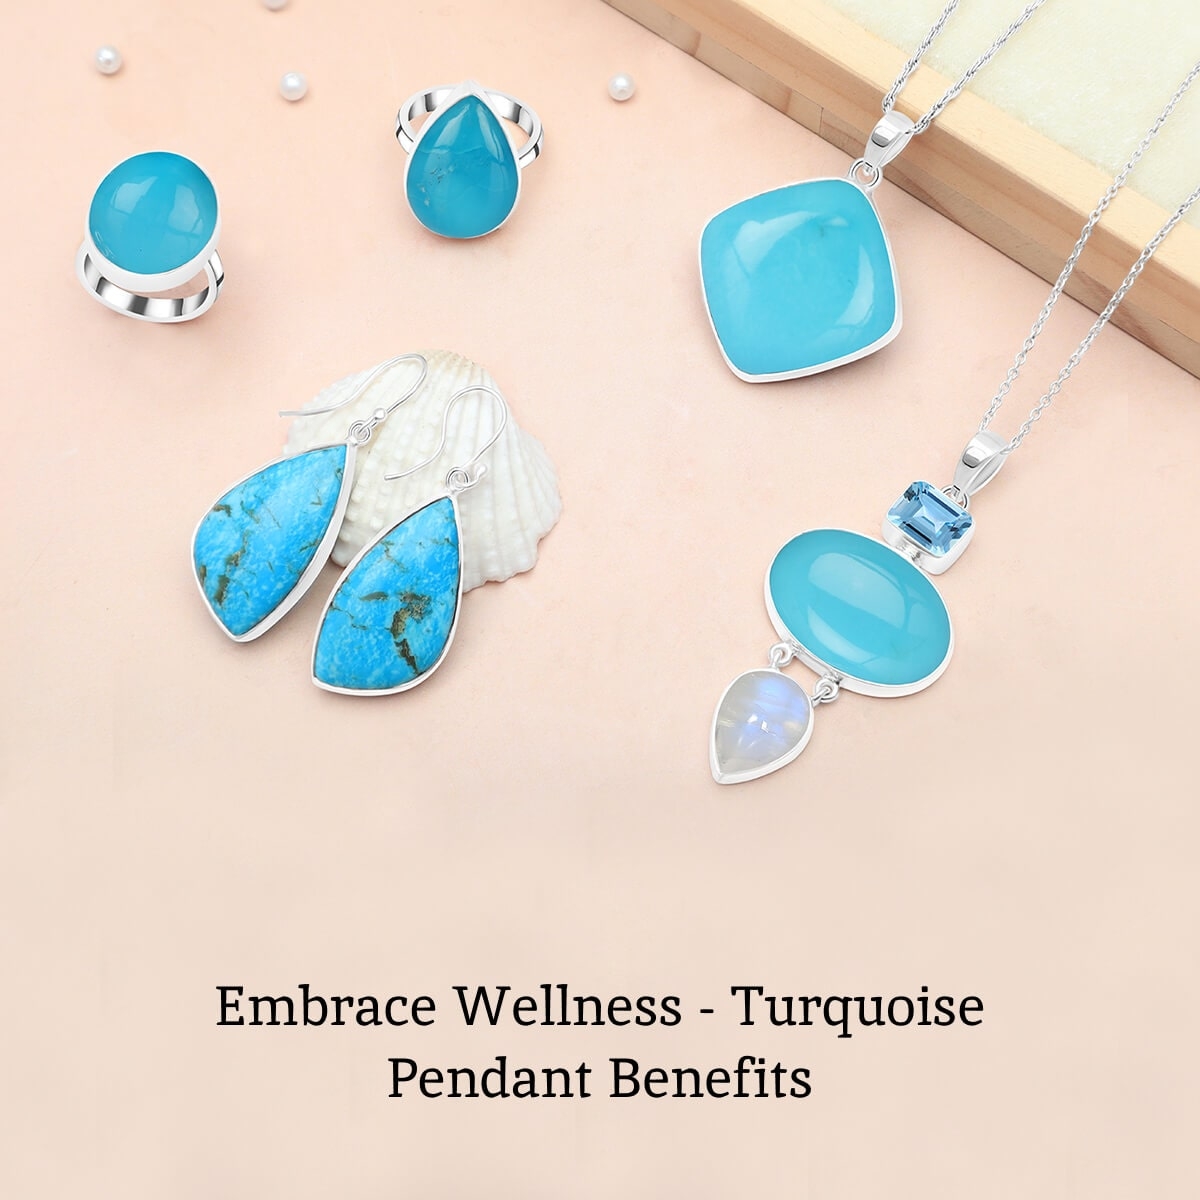 Benefits of wearing the Turquoise pendant